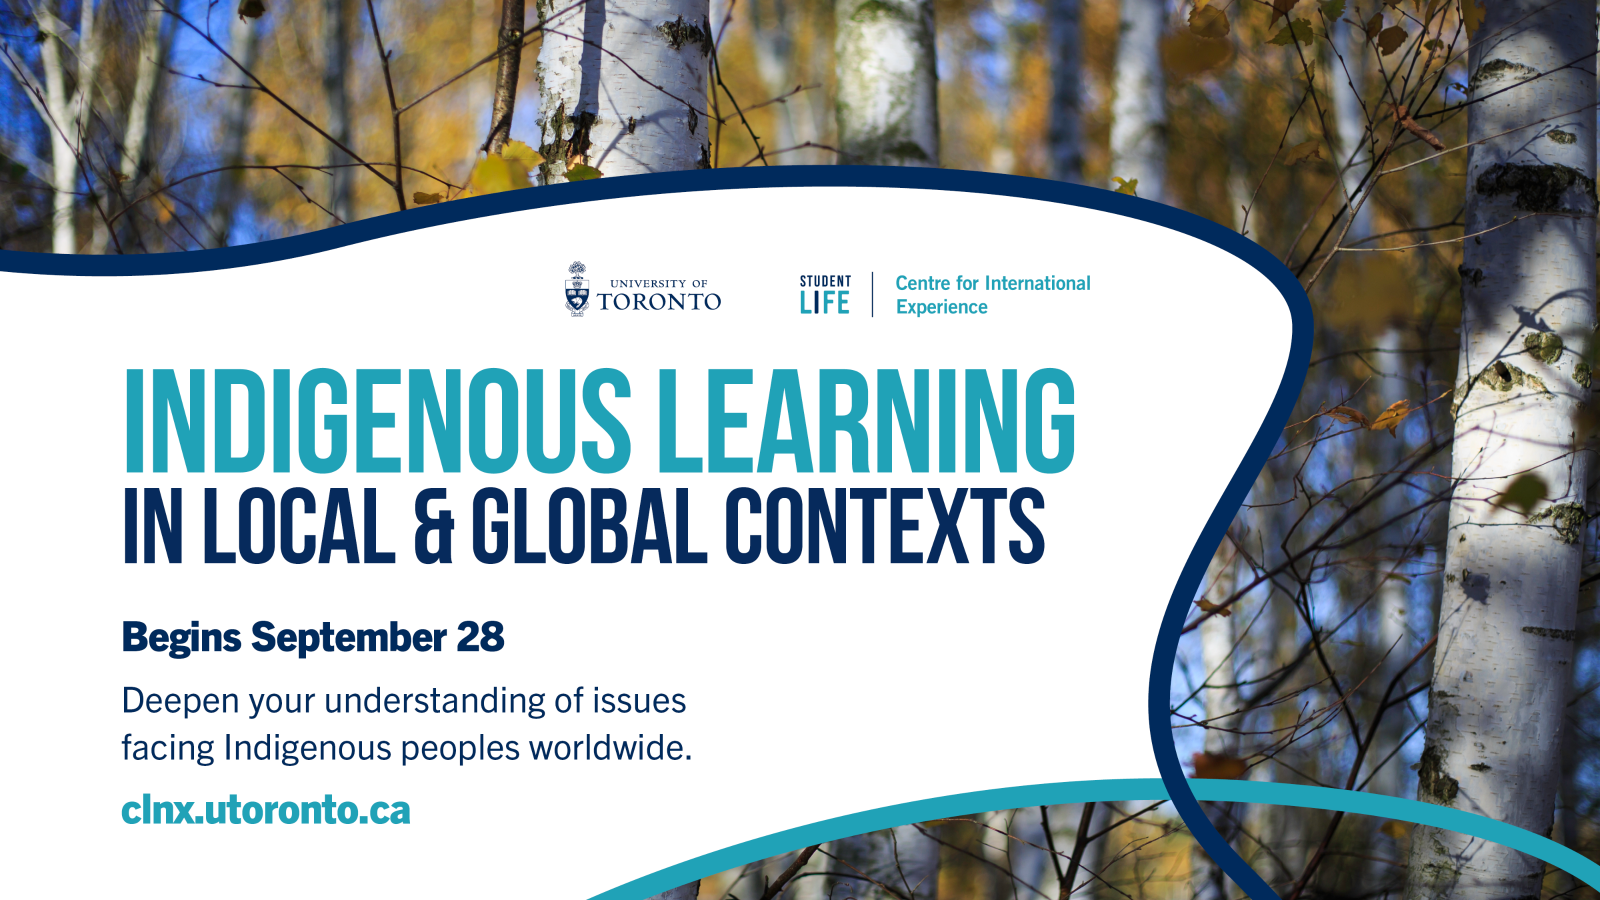 A photo of tree trucks with text, "Indigenous Learning in Local & Global Contexts. Begins September 28. Deepen your understanding of issues facing Indigenous peoples worldwide. clnx.utoronto.ca" 